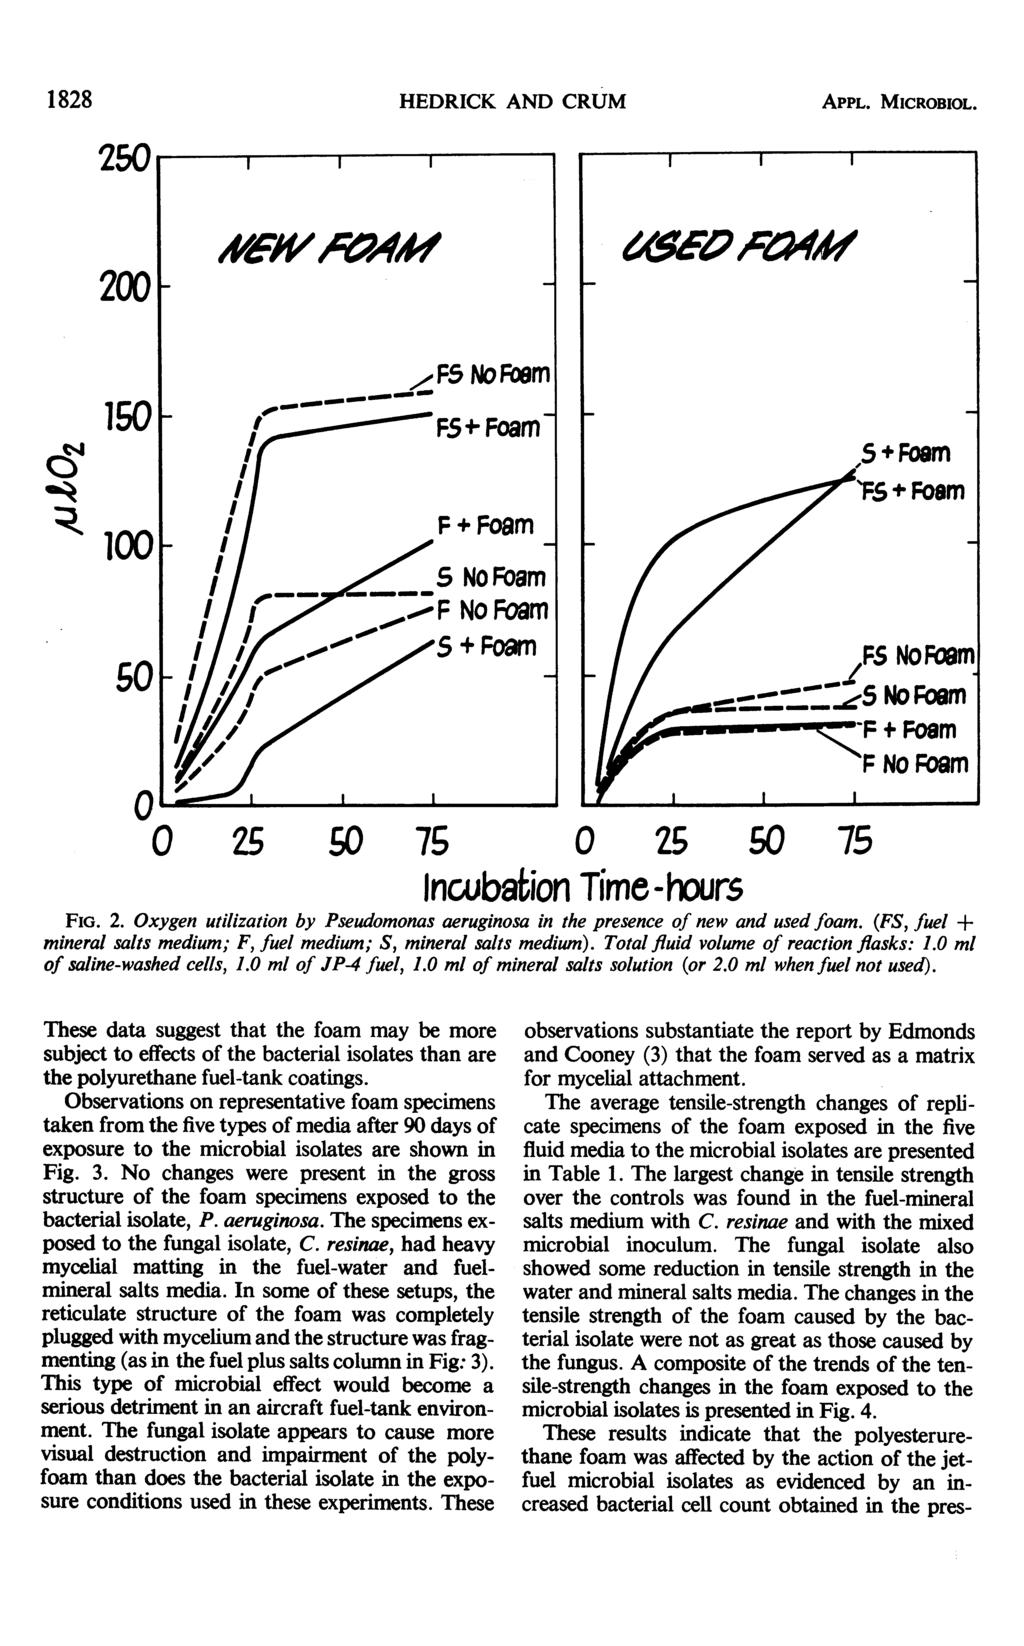 1828 HEDRICK AND CRUM APPL. MICROBIOL. o 0 25 so 75 0 25 50 75 Incubation Time -hours FiG. 2. Oxygen utilization by Pseudomonas aeruginosa in the presence of new and used foam.